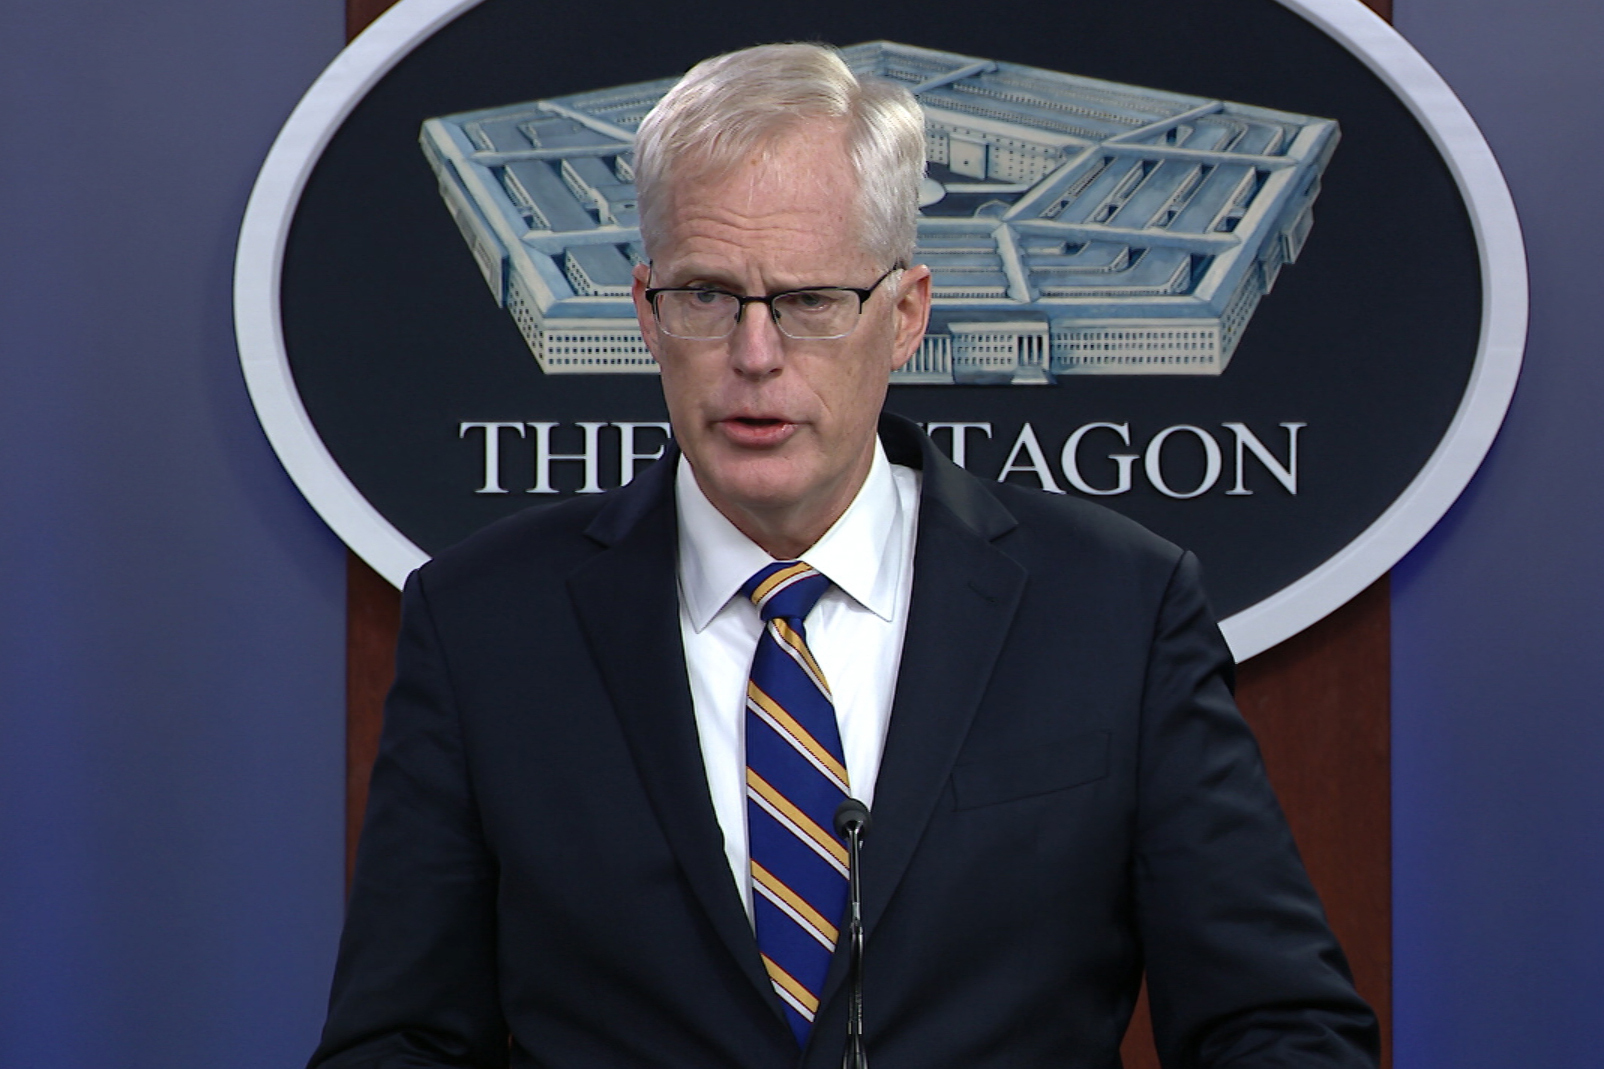 PHOTO: In this Tuesday, Nov. 17, 2020, image taken from a video provided by Defense.gov acting Defense Secretary Christopher Miller speaks at the Pentagon in Washington.